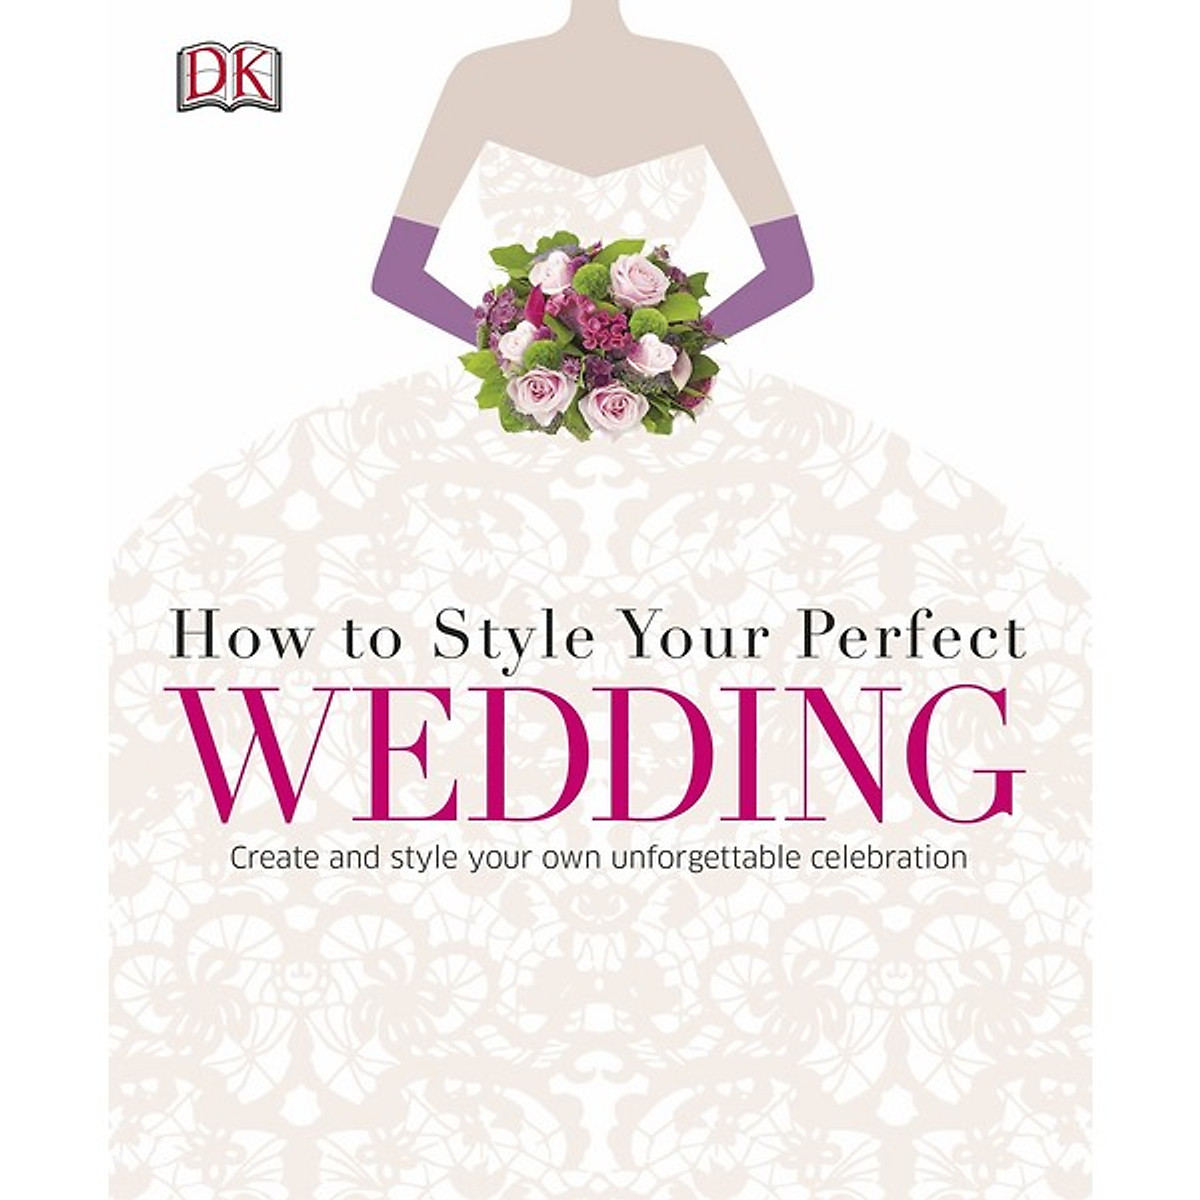 How to Style Your Perfect Wedding